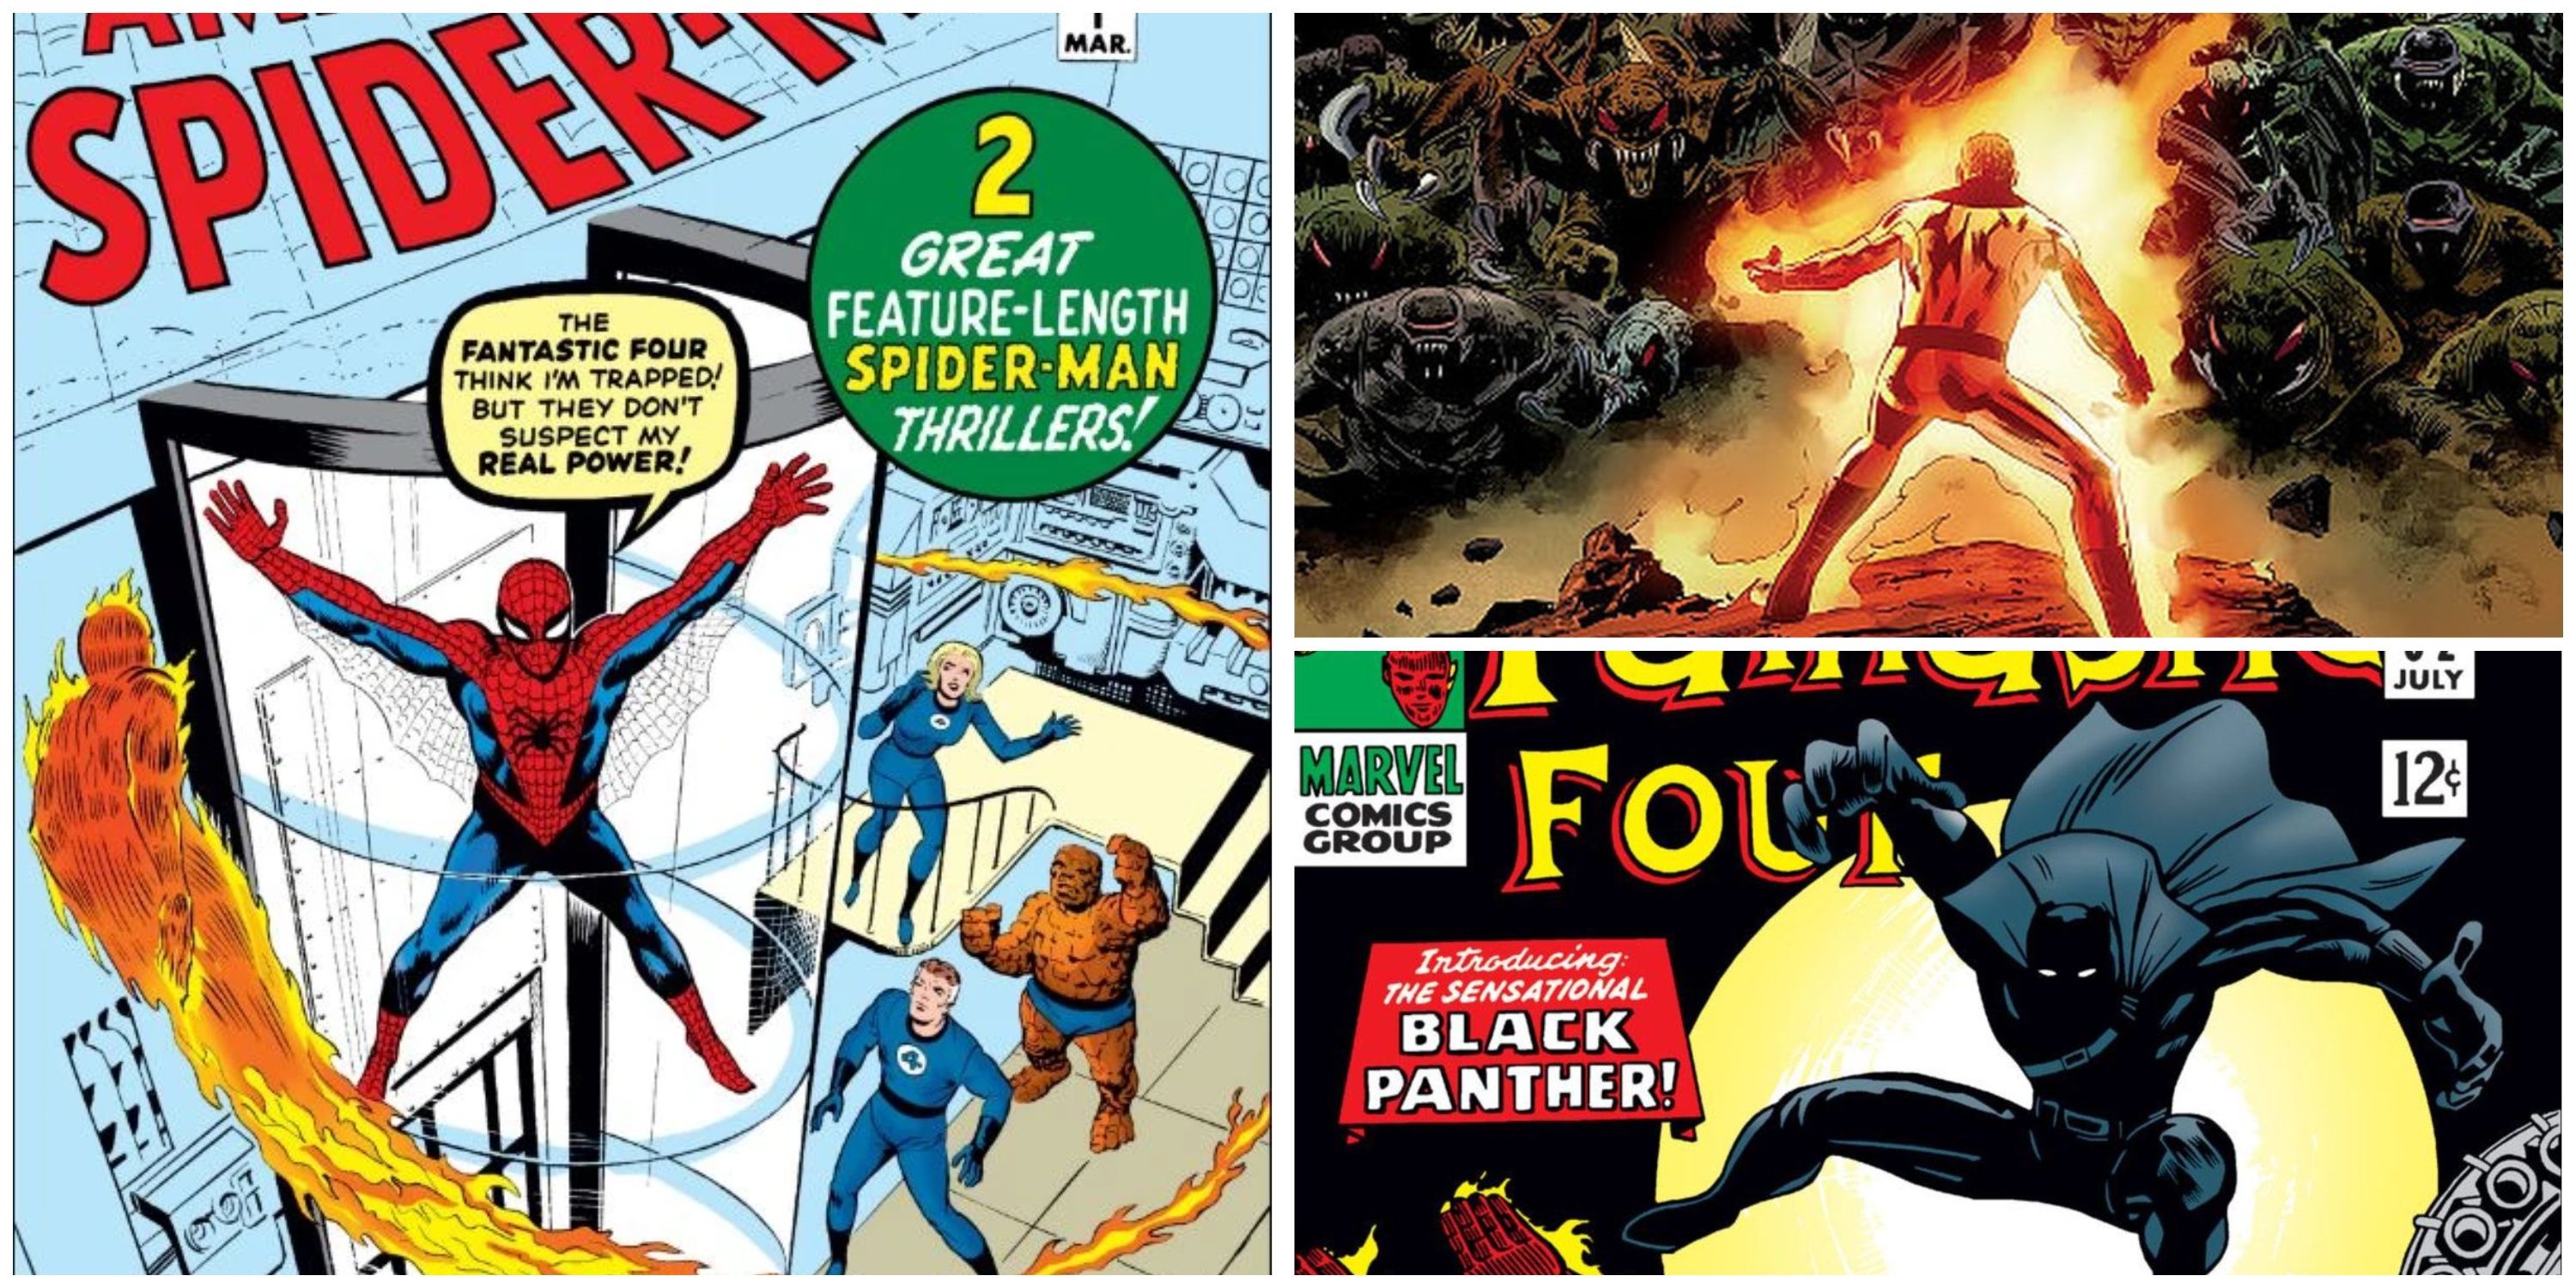 Split image: Steve Ditko's Spider-Man and the Fantastic Four, Human Torch facing monsters and Black Panther vs Fantastic Four